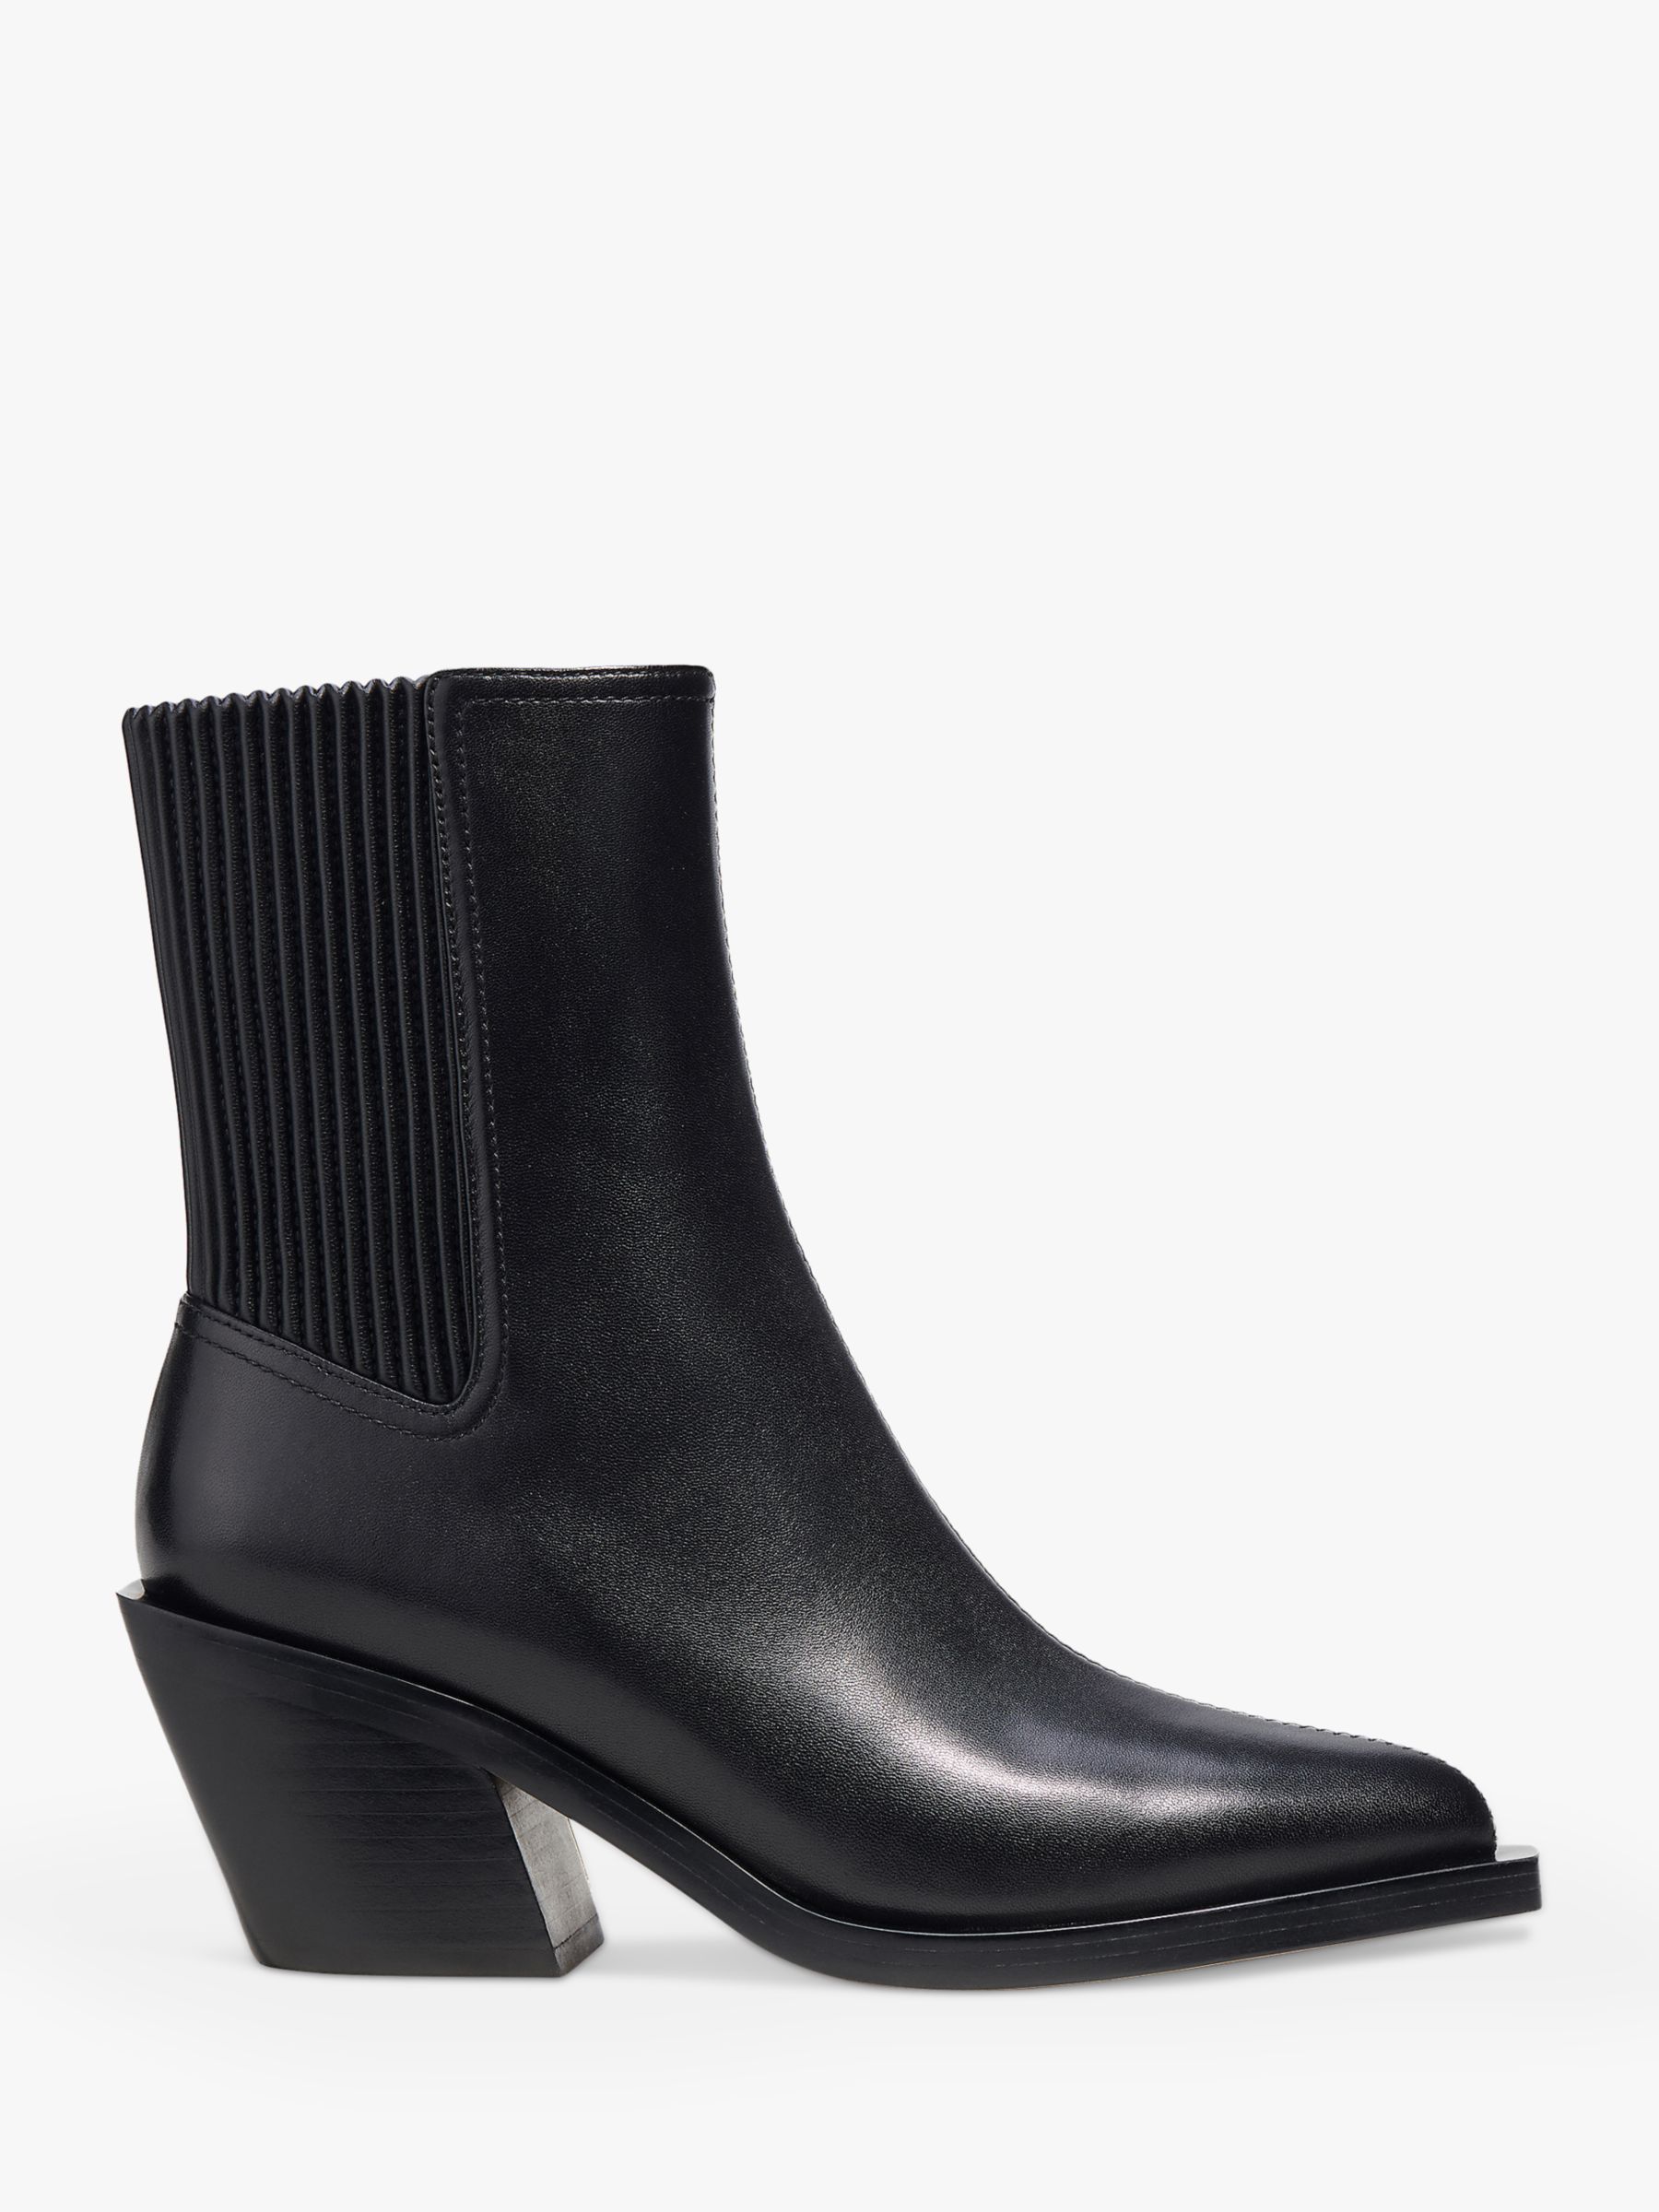 Coach Prestyn Western Leather Boots, Black at John Lewis & Partners